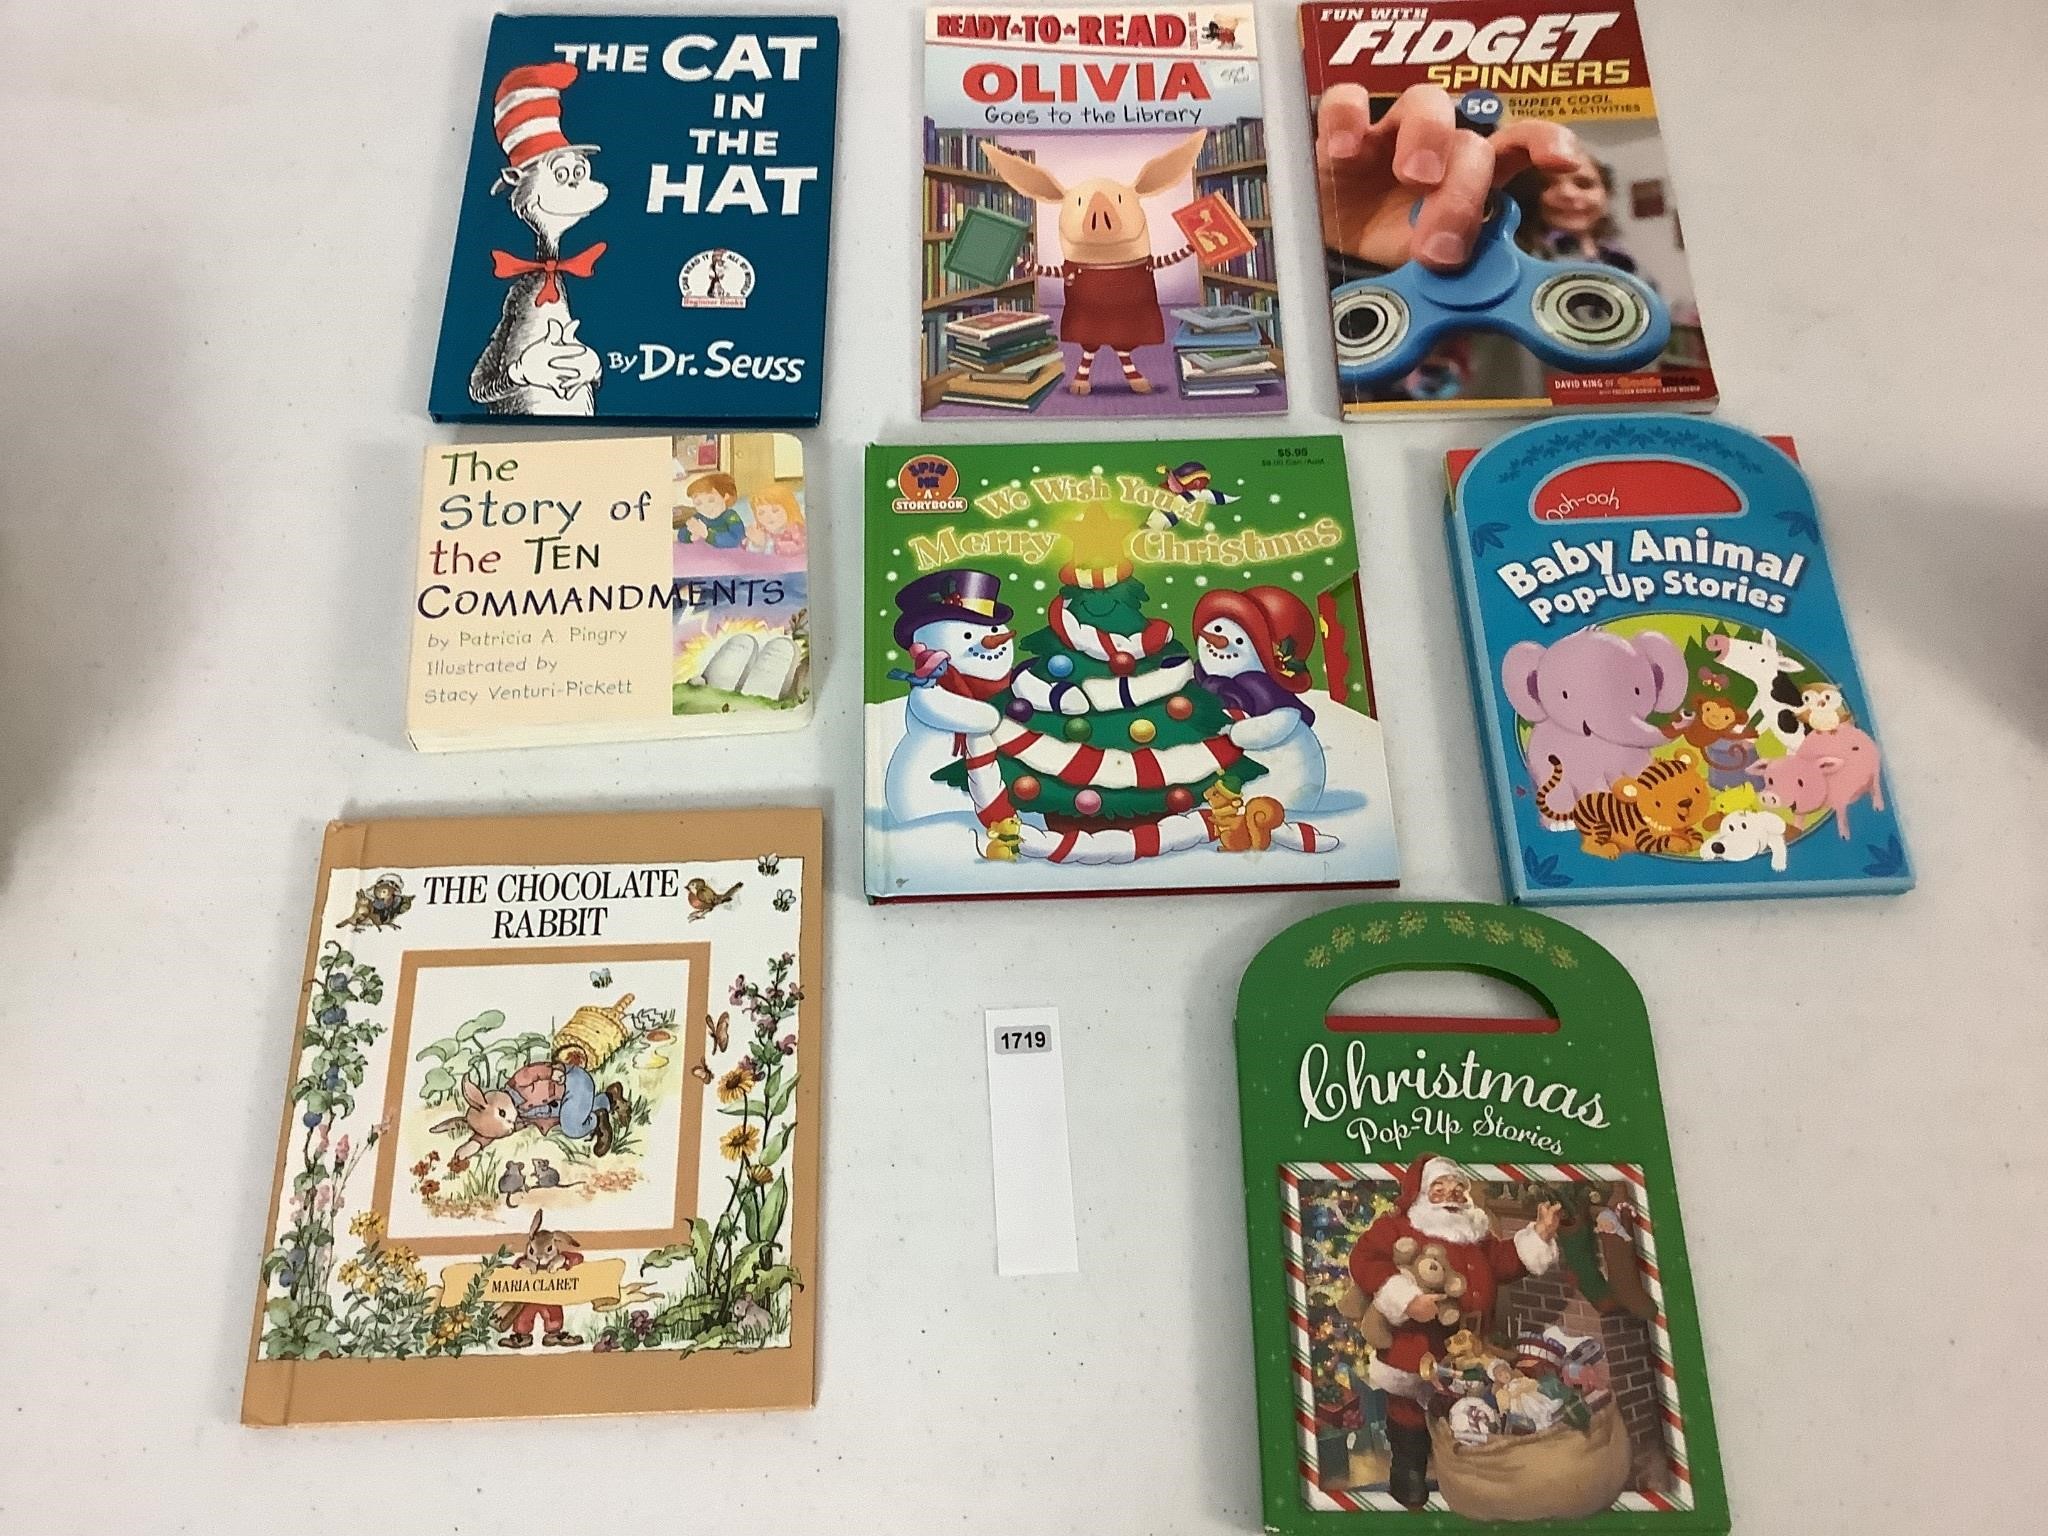 DR. SEUSS (1985) & OTHER BOOKS